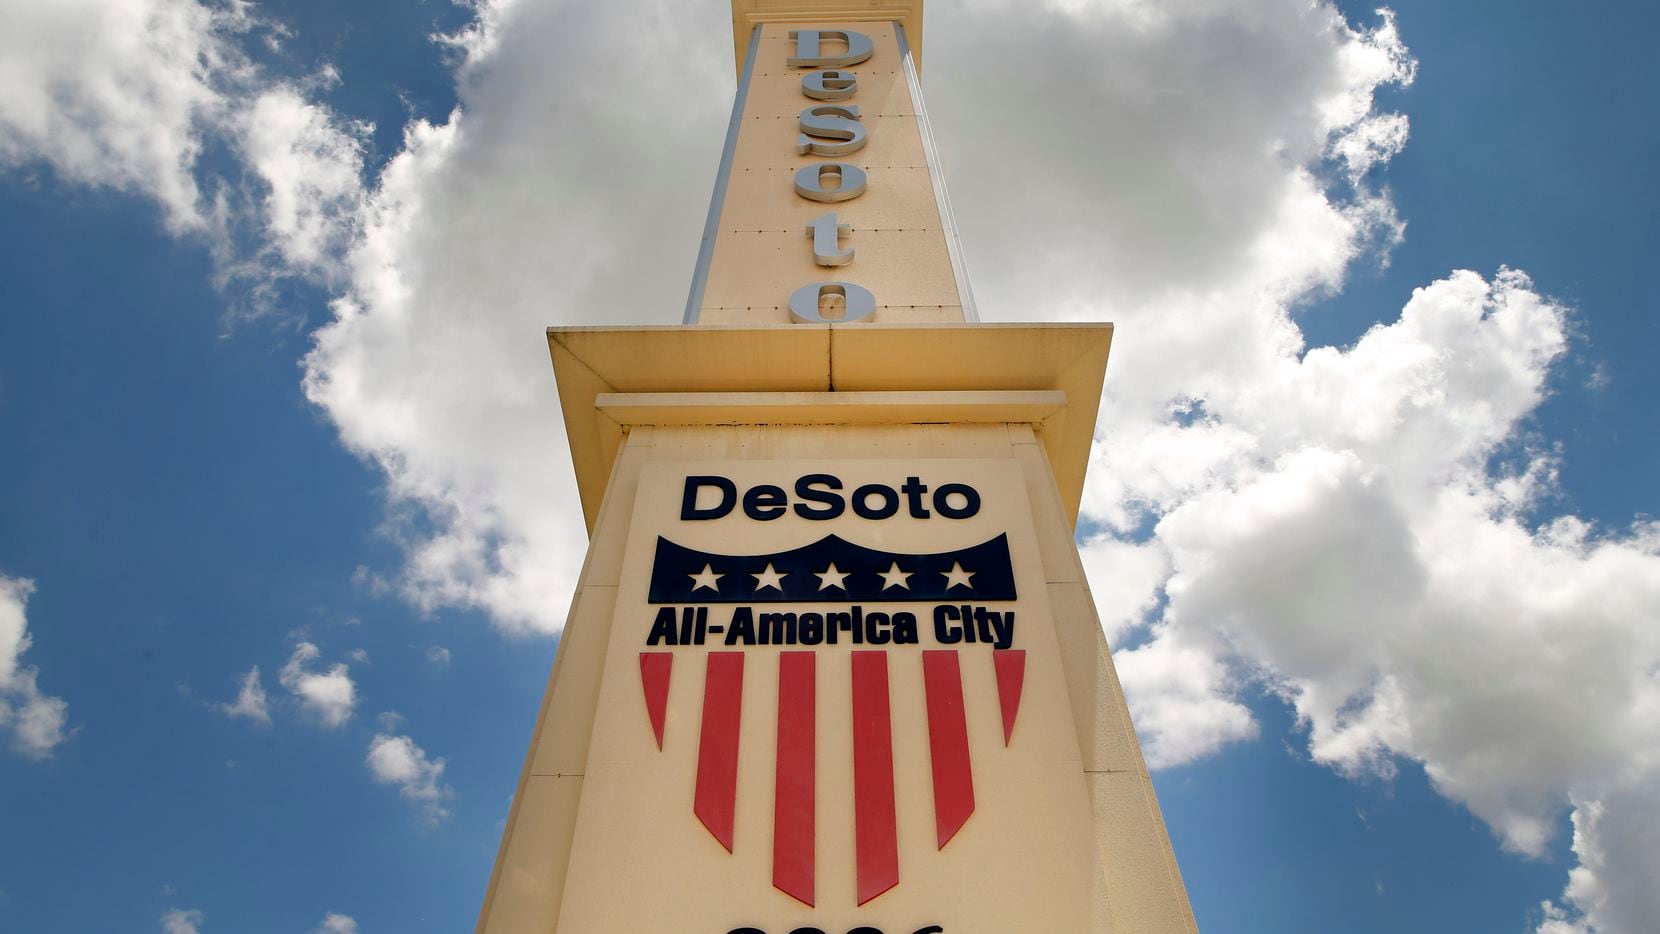 A large obelisk greets people to the City of Desoto at the intersection of E. Pleasant Run...